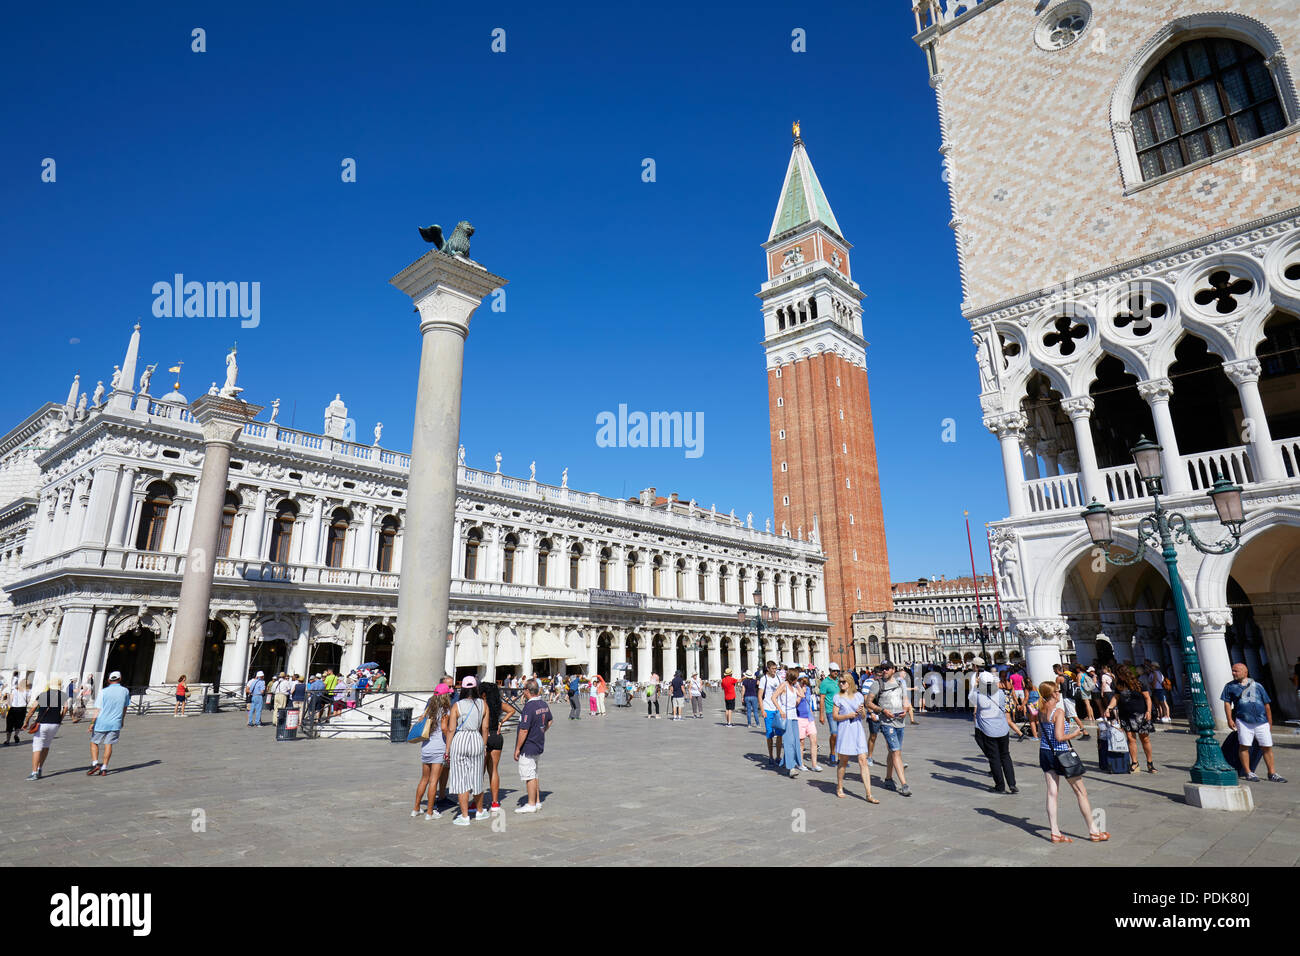 San Marco bell tower, National Marciana library facade, lion statue and people in the square, clear blue sky in Venice Stock Photo